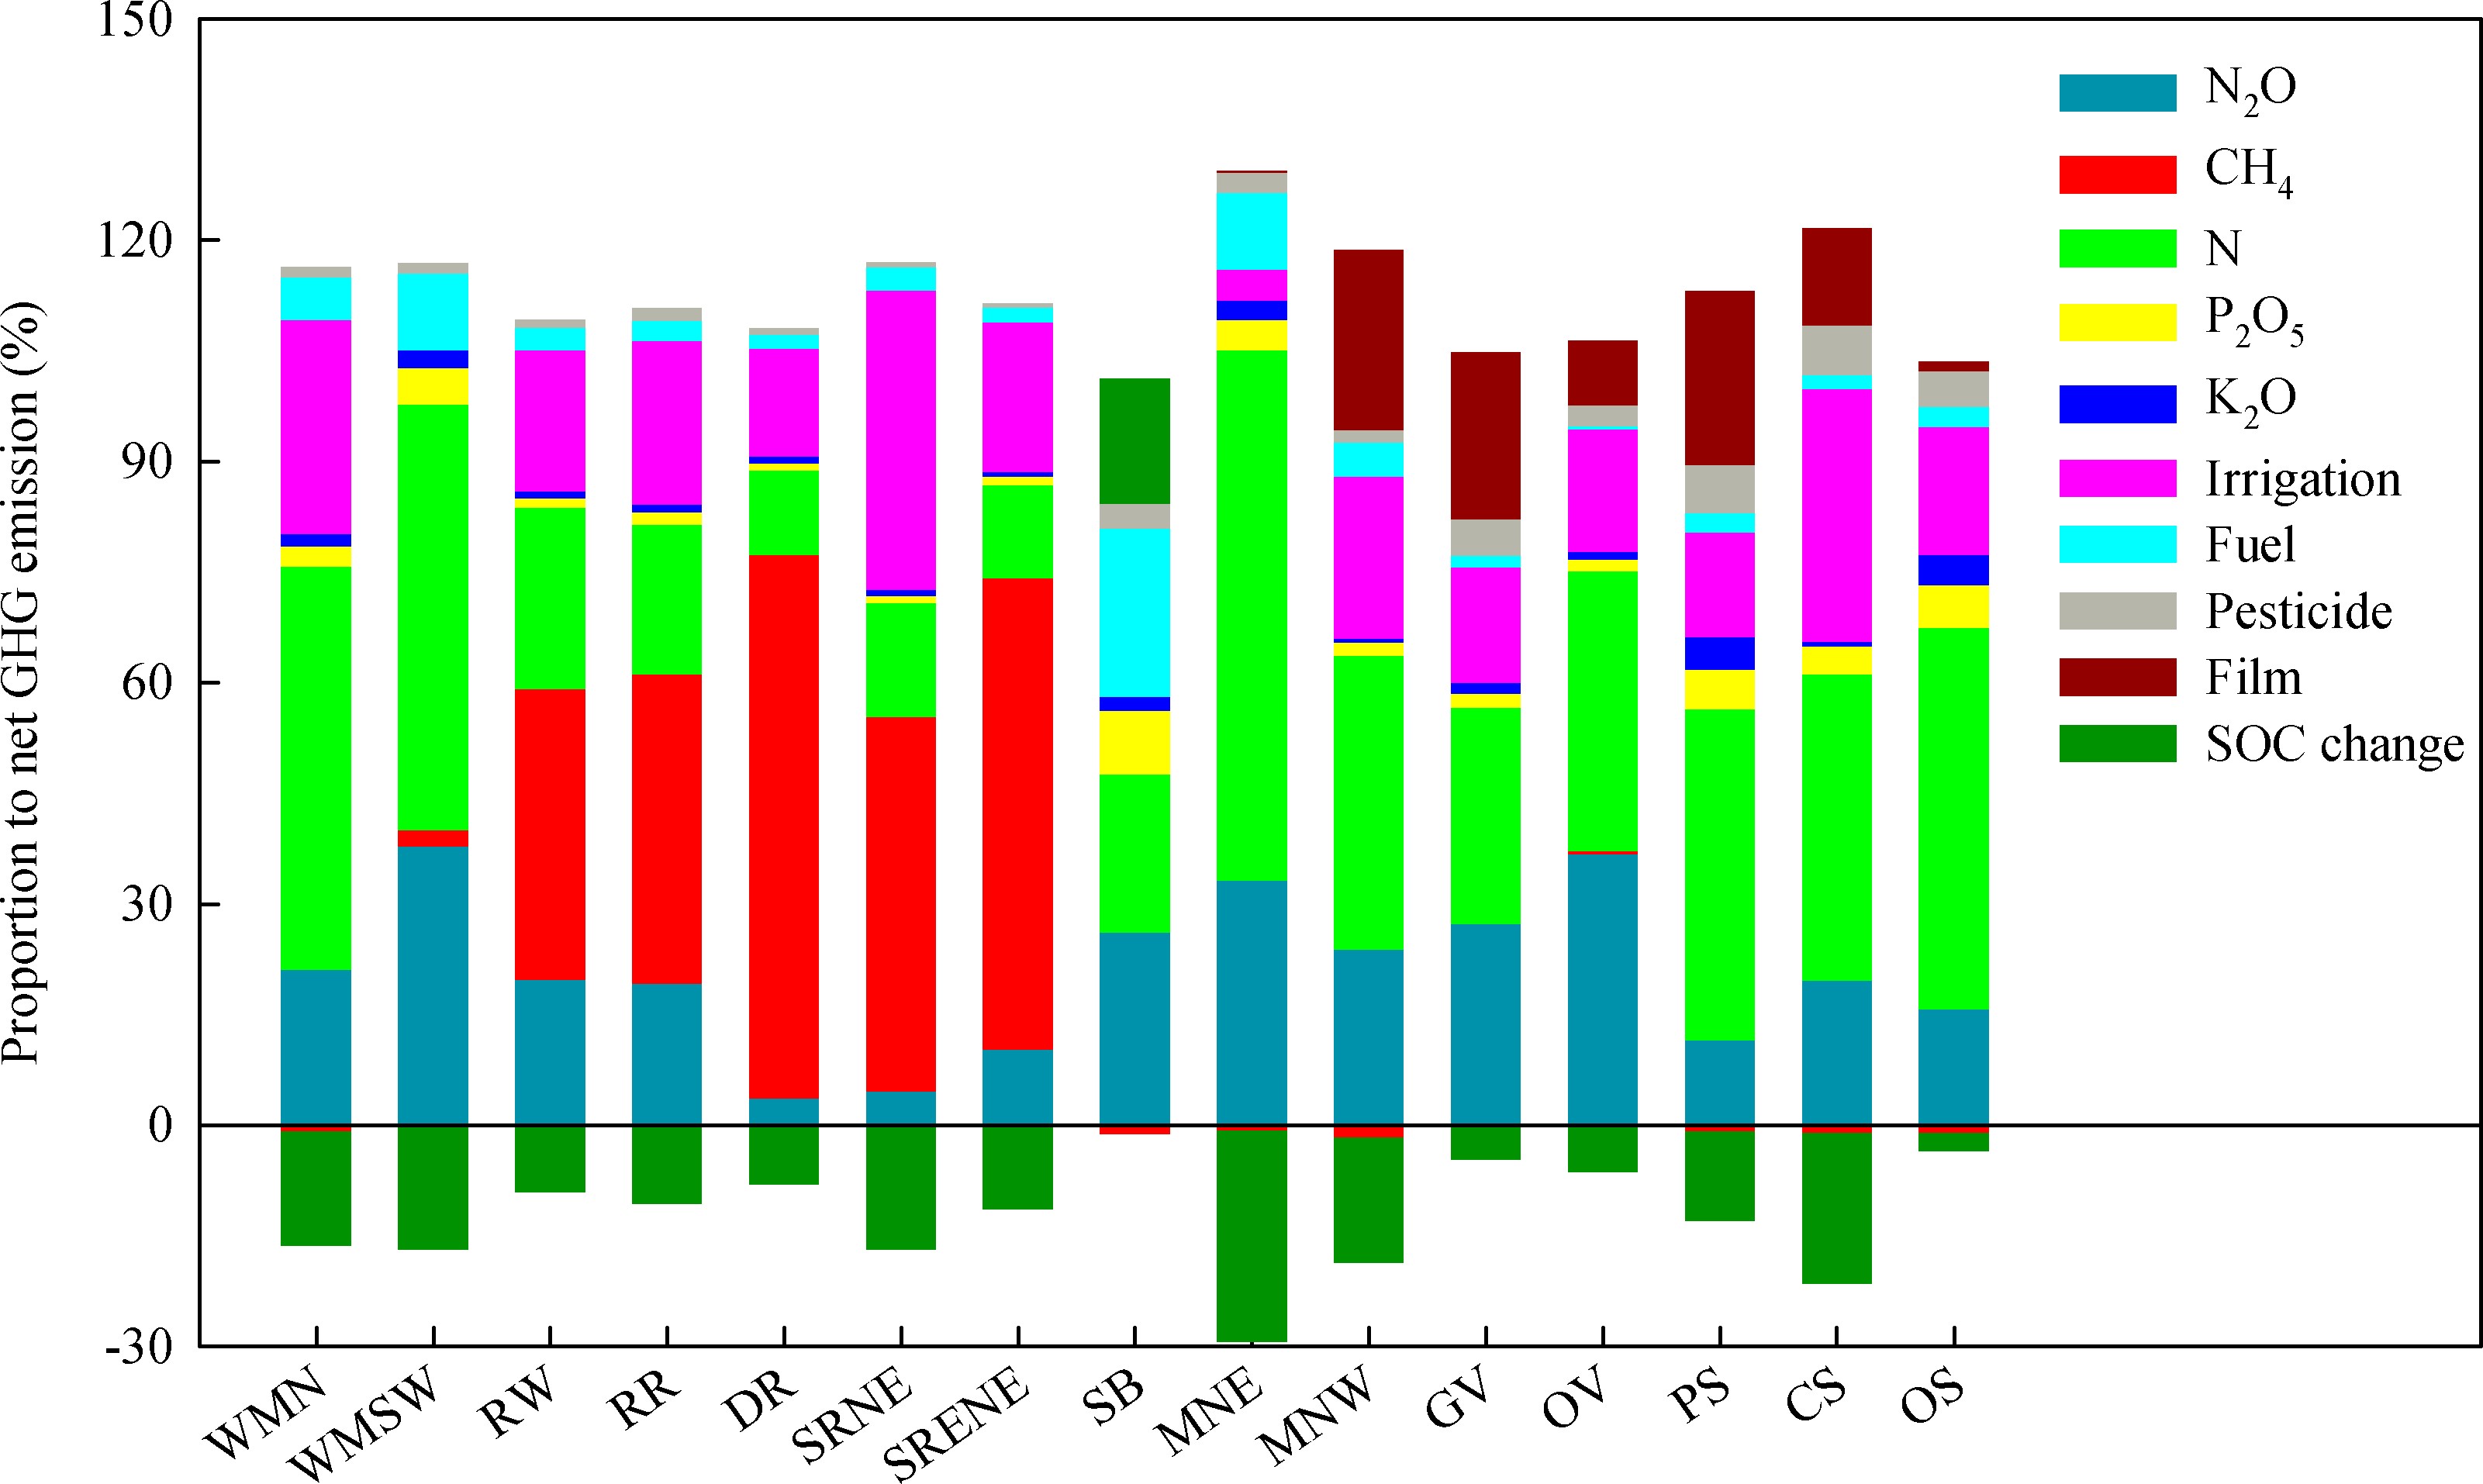 Sources and allocation of greenhouse gas emissions in different cropping systems in China